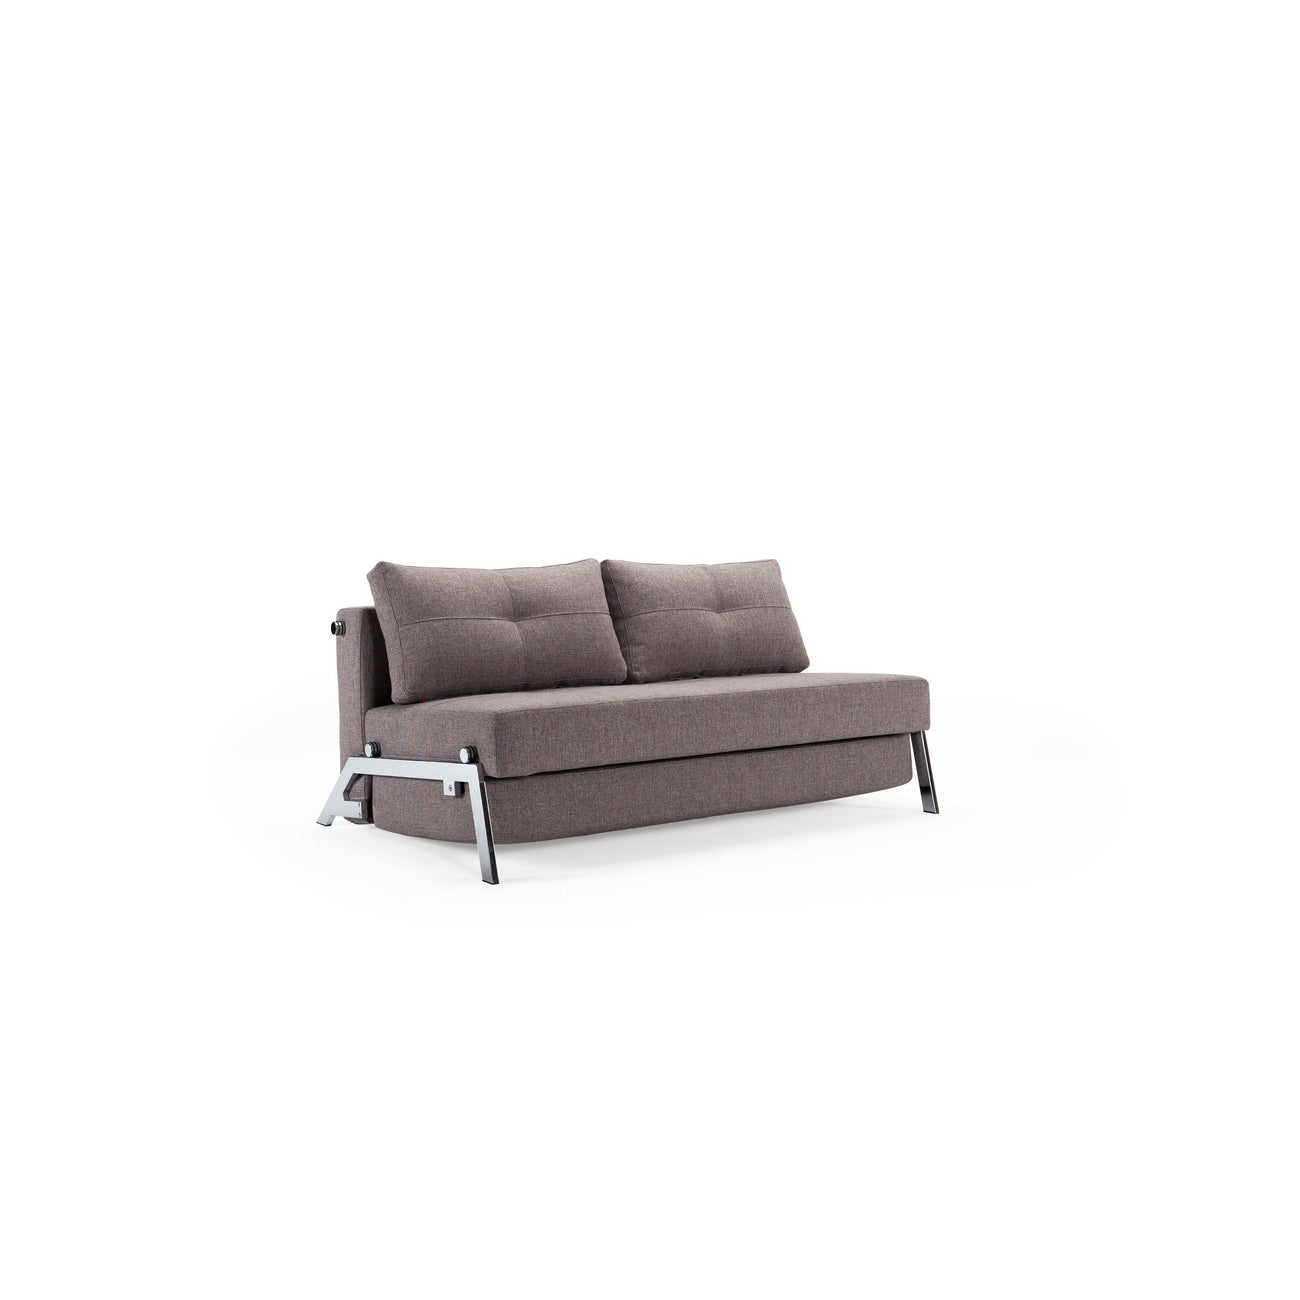 Cubed 02 deluxe sofa CHROME (FULL)-Innovation Living-INNO-94-744002521-0-SofasMixed Dance Grey-1-France and Son